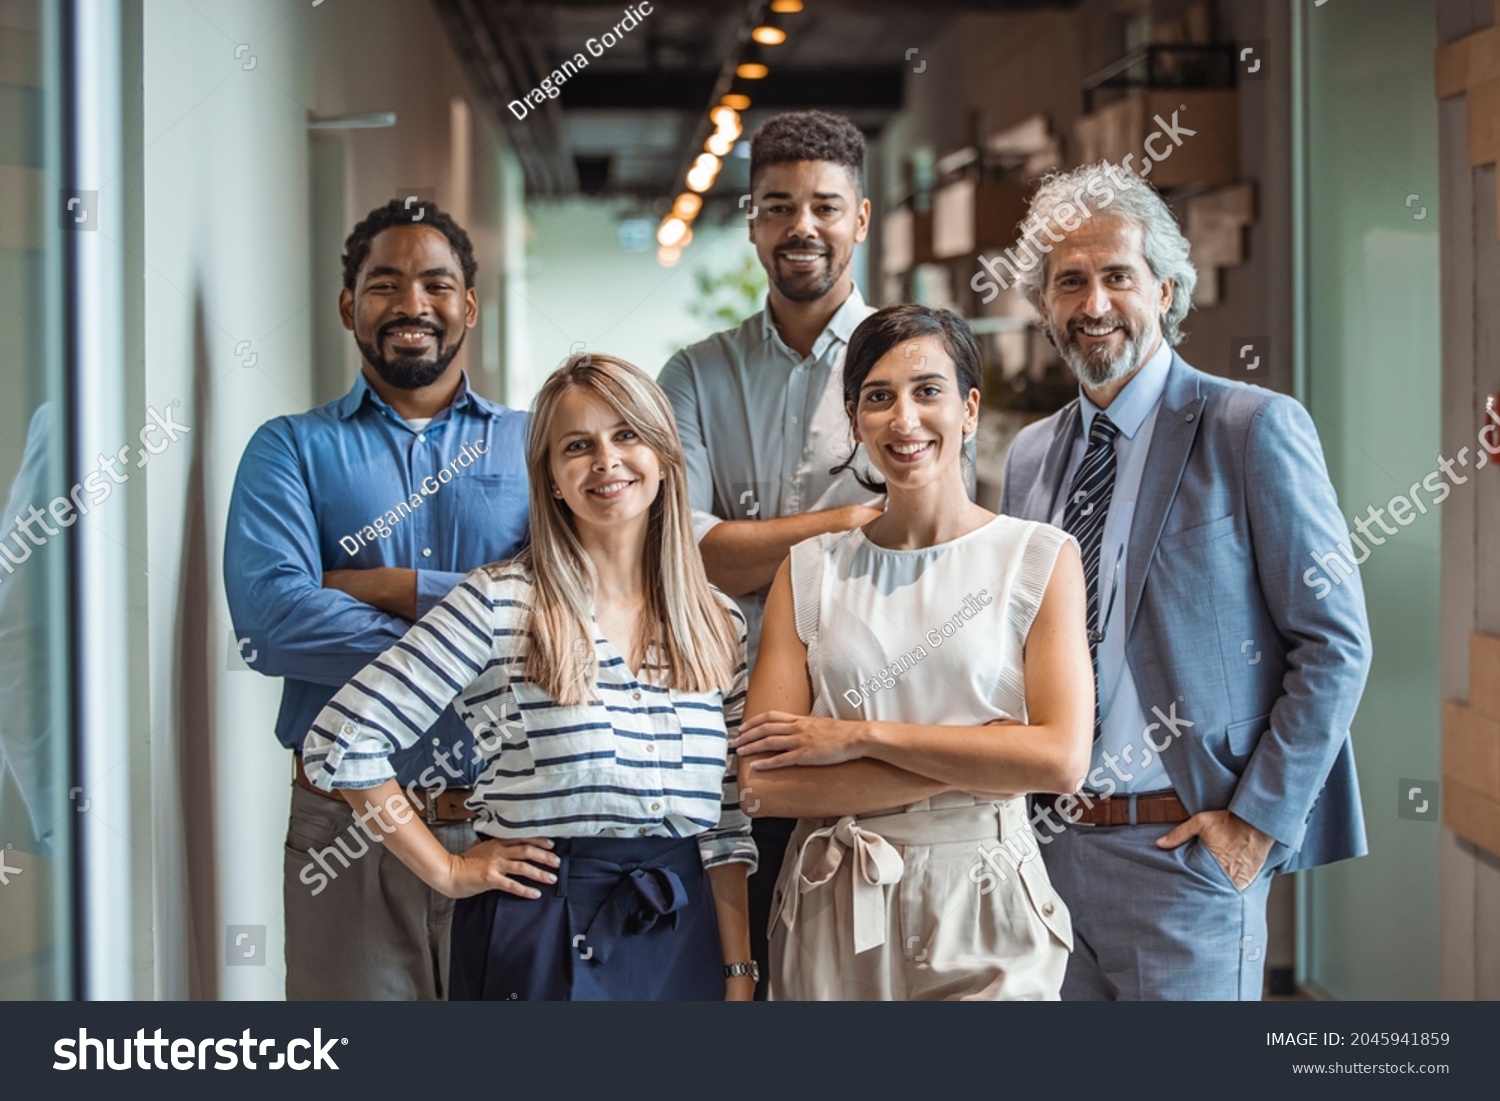 Shot of a group of well-dressed businesspeople standing together. Successful business team smiling teamwork corporate office colleague. Ready to make success happen #2045941859